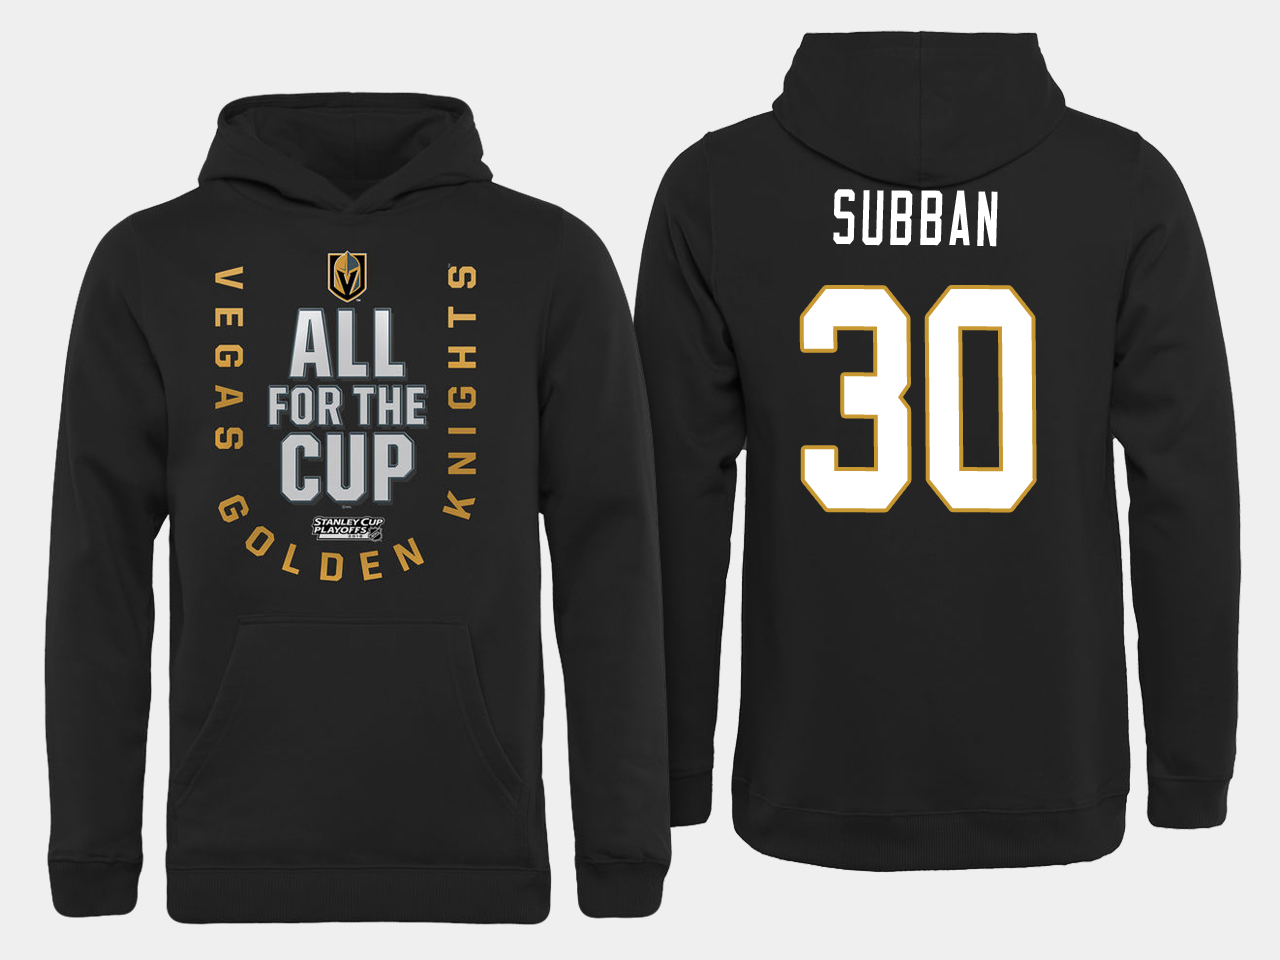 Men NHL Vegas Golden Knights 30 Subban All for the Cup hoodie